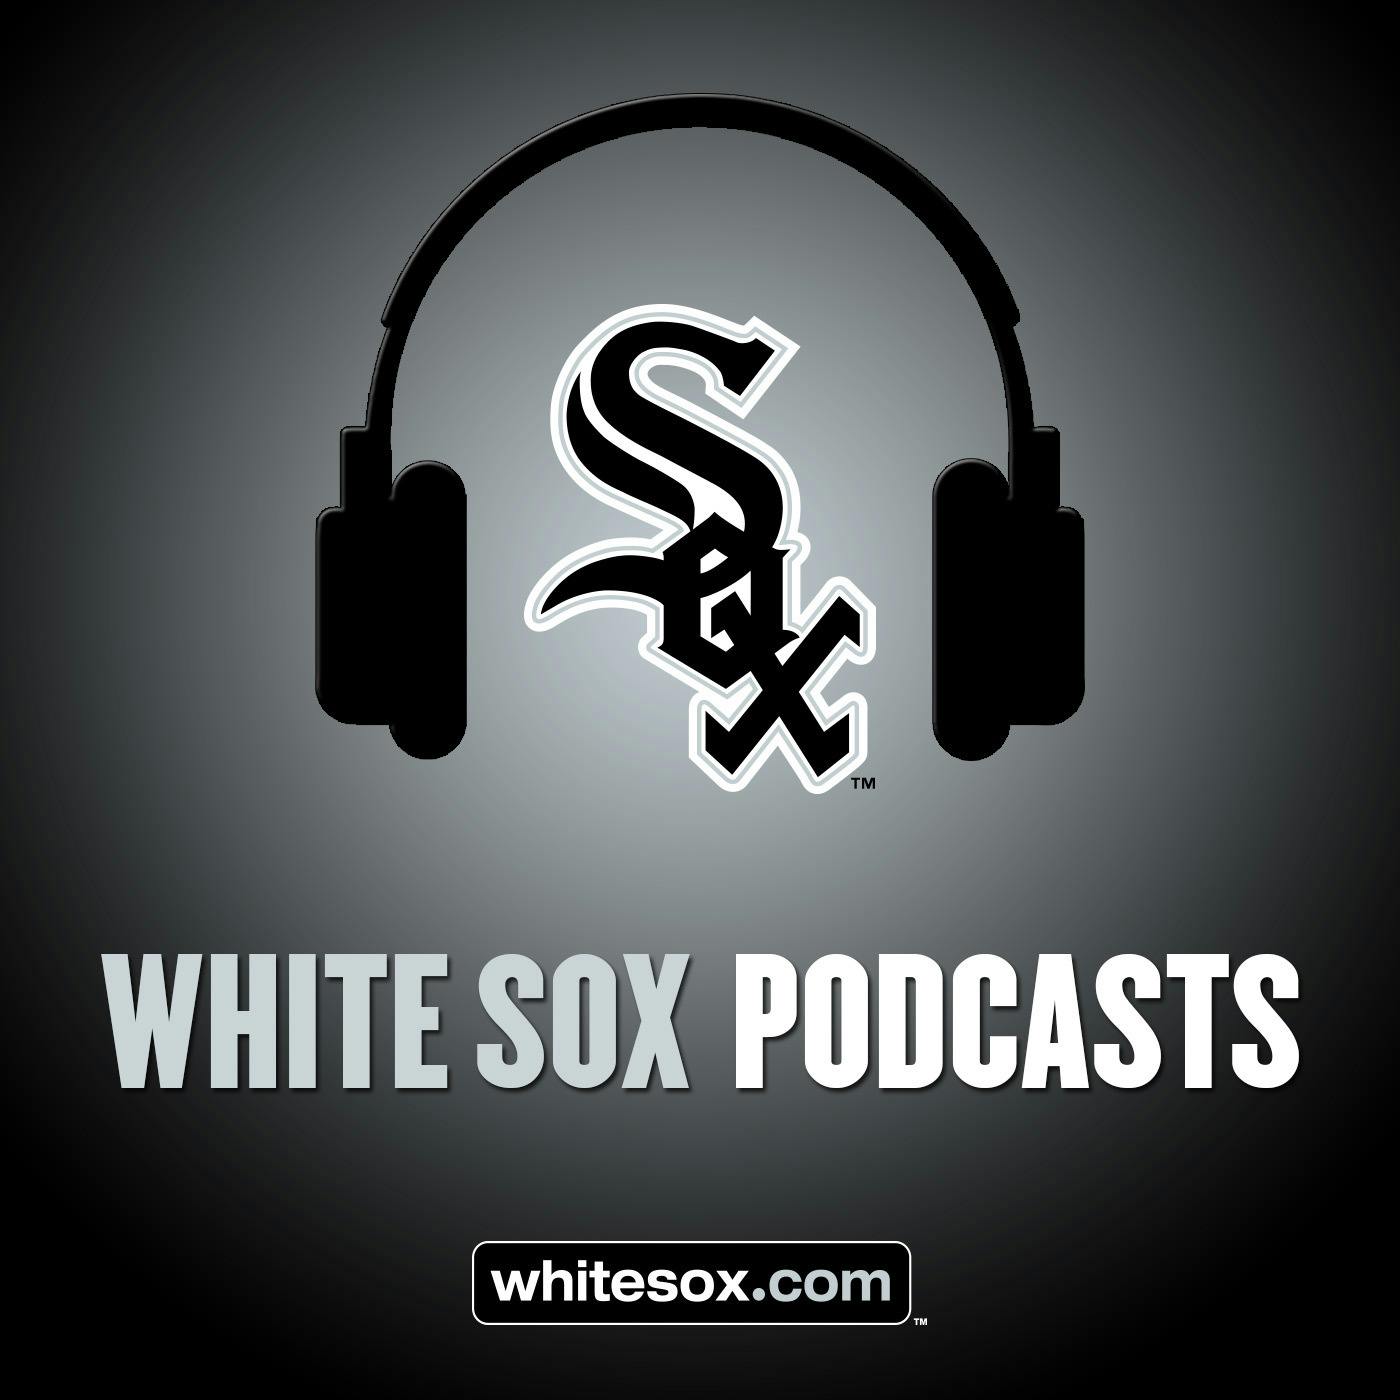 2/4/18: White Sox Weekly